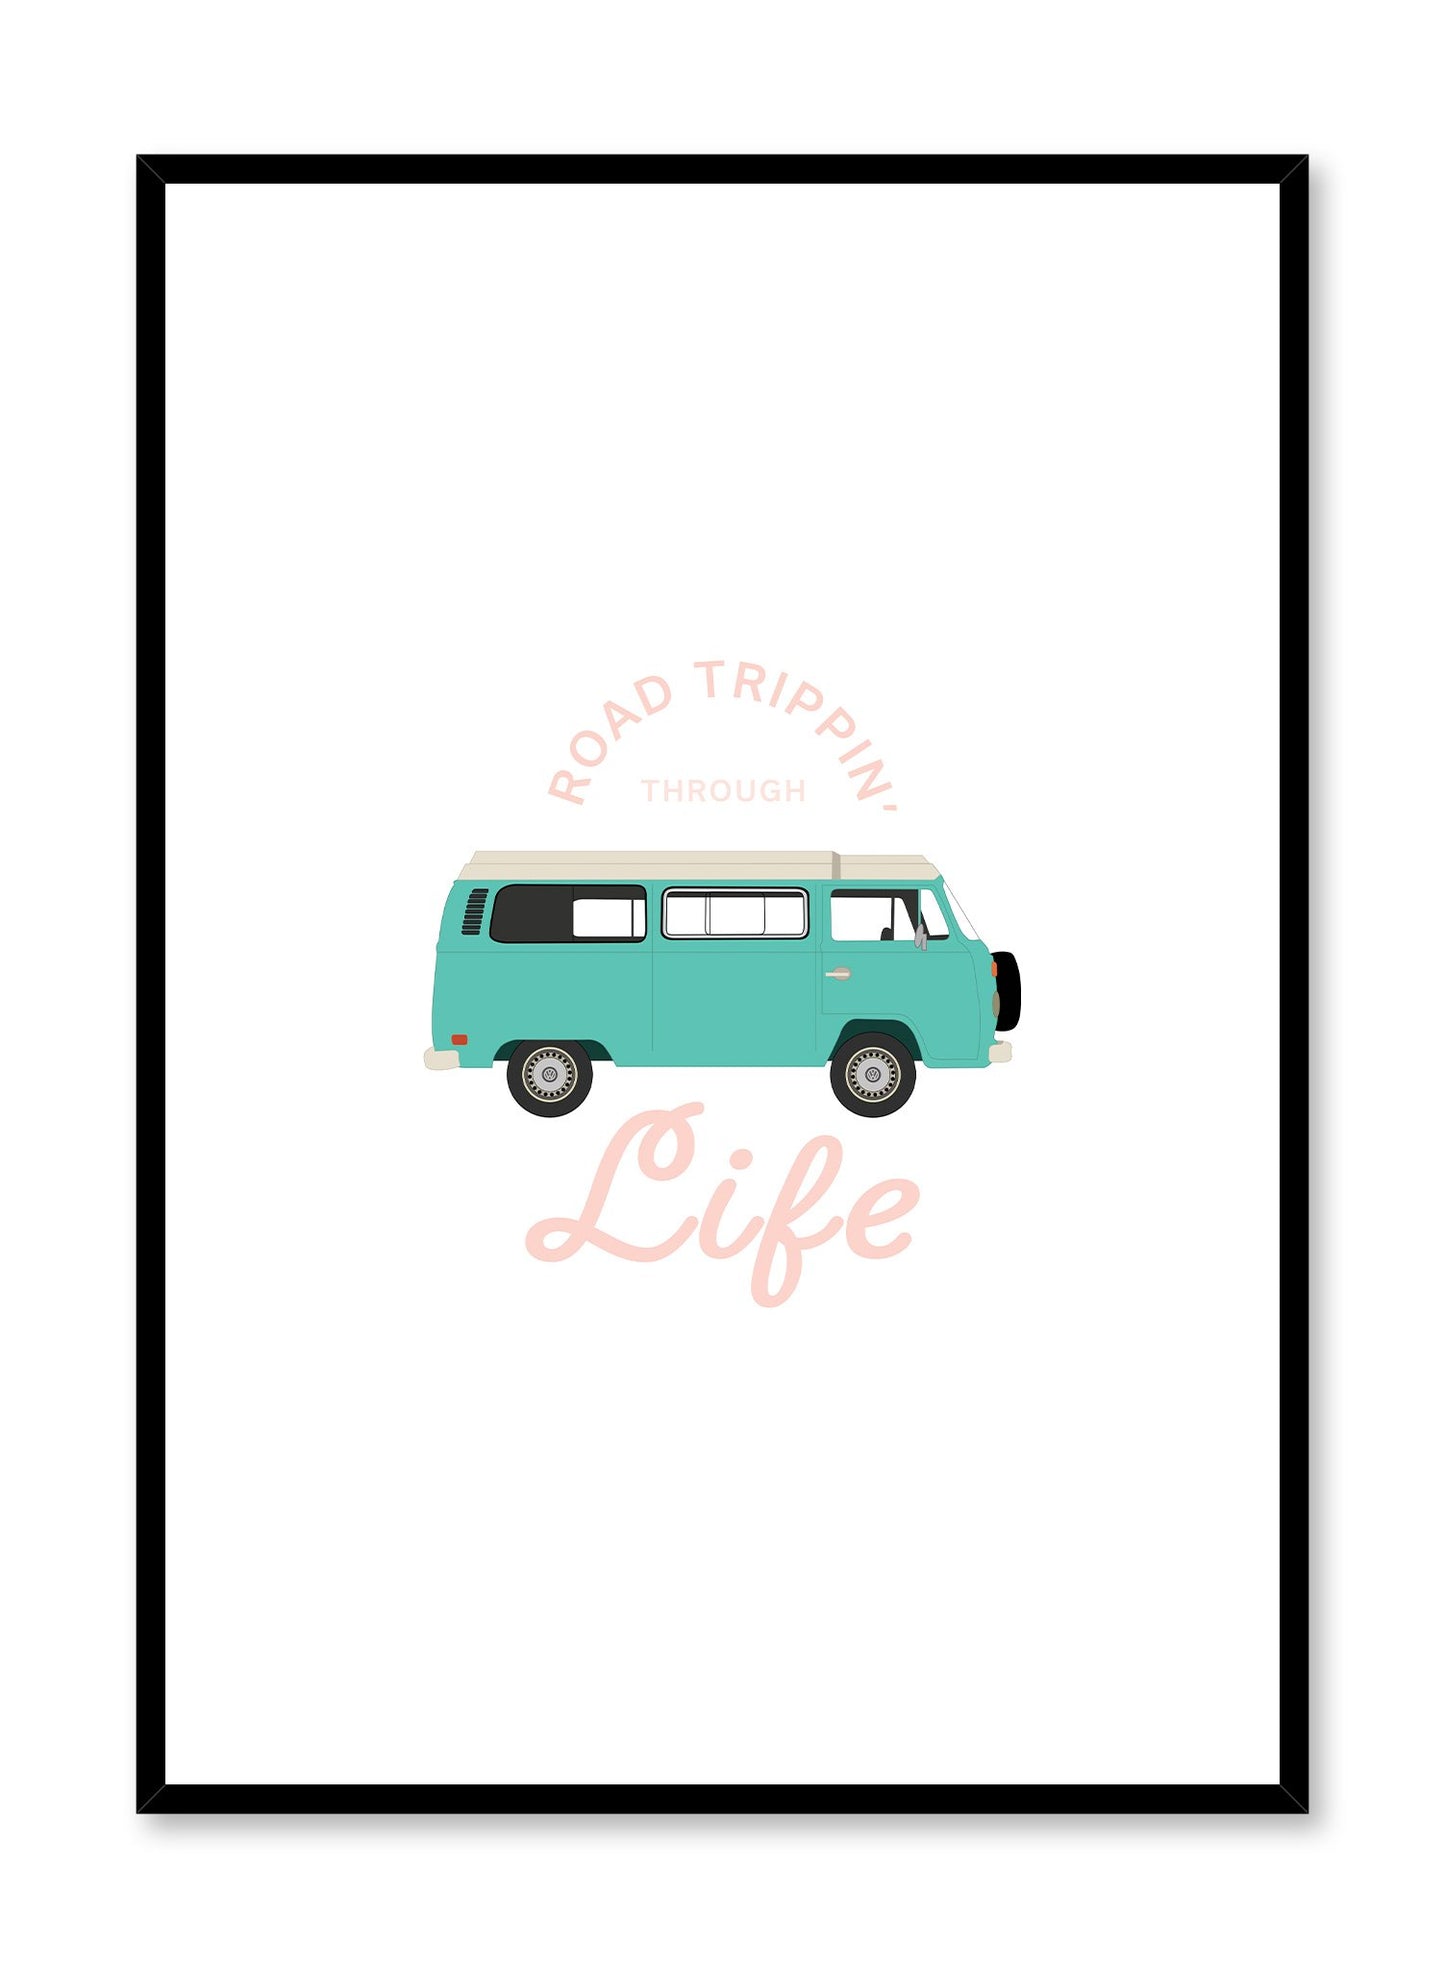 Road Trippin’ is a minimalist illustration poster of a teal Winnebago van by Opposite Wall.